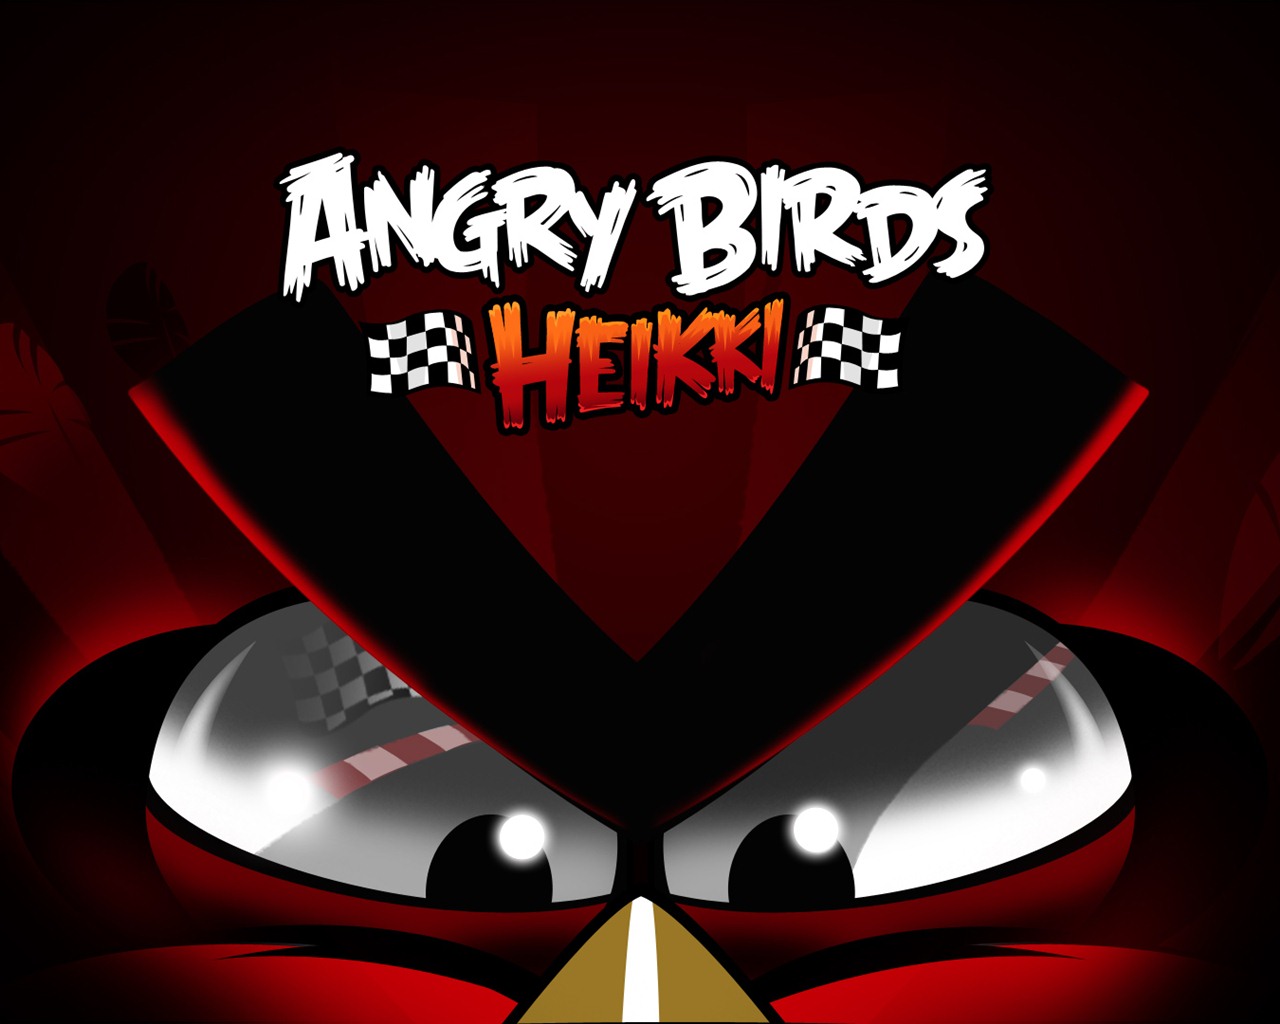 Angry Birds Game Wallpapers #18 - 1280x1024